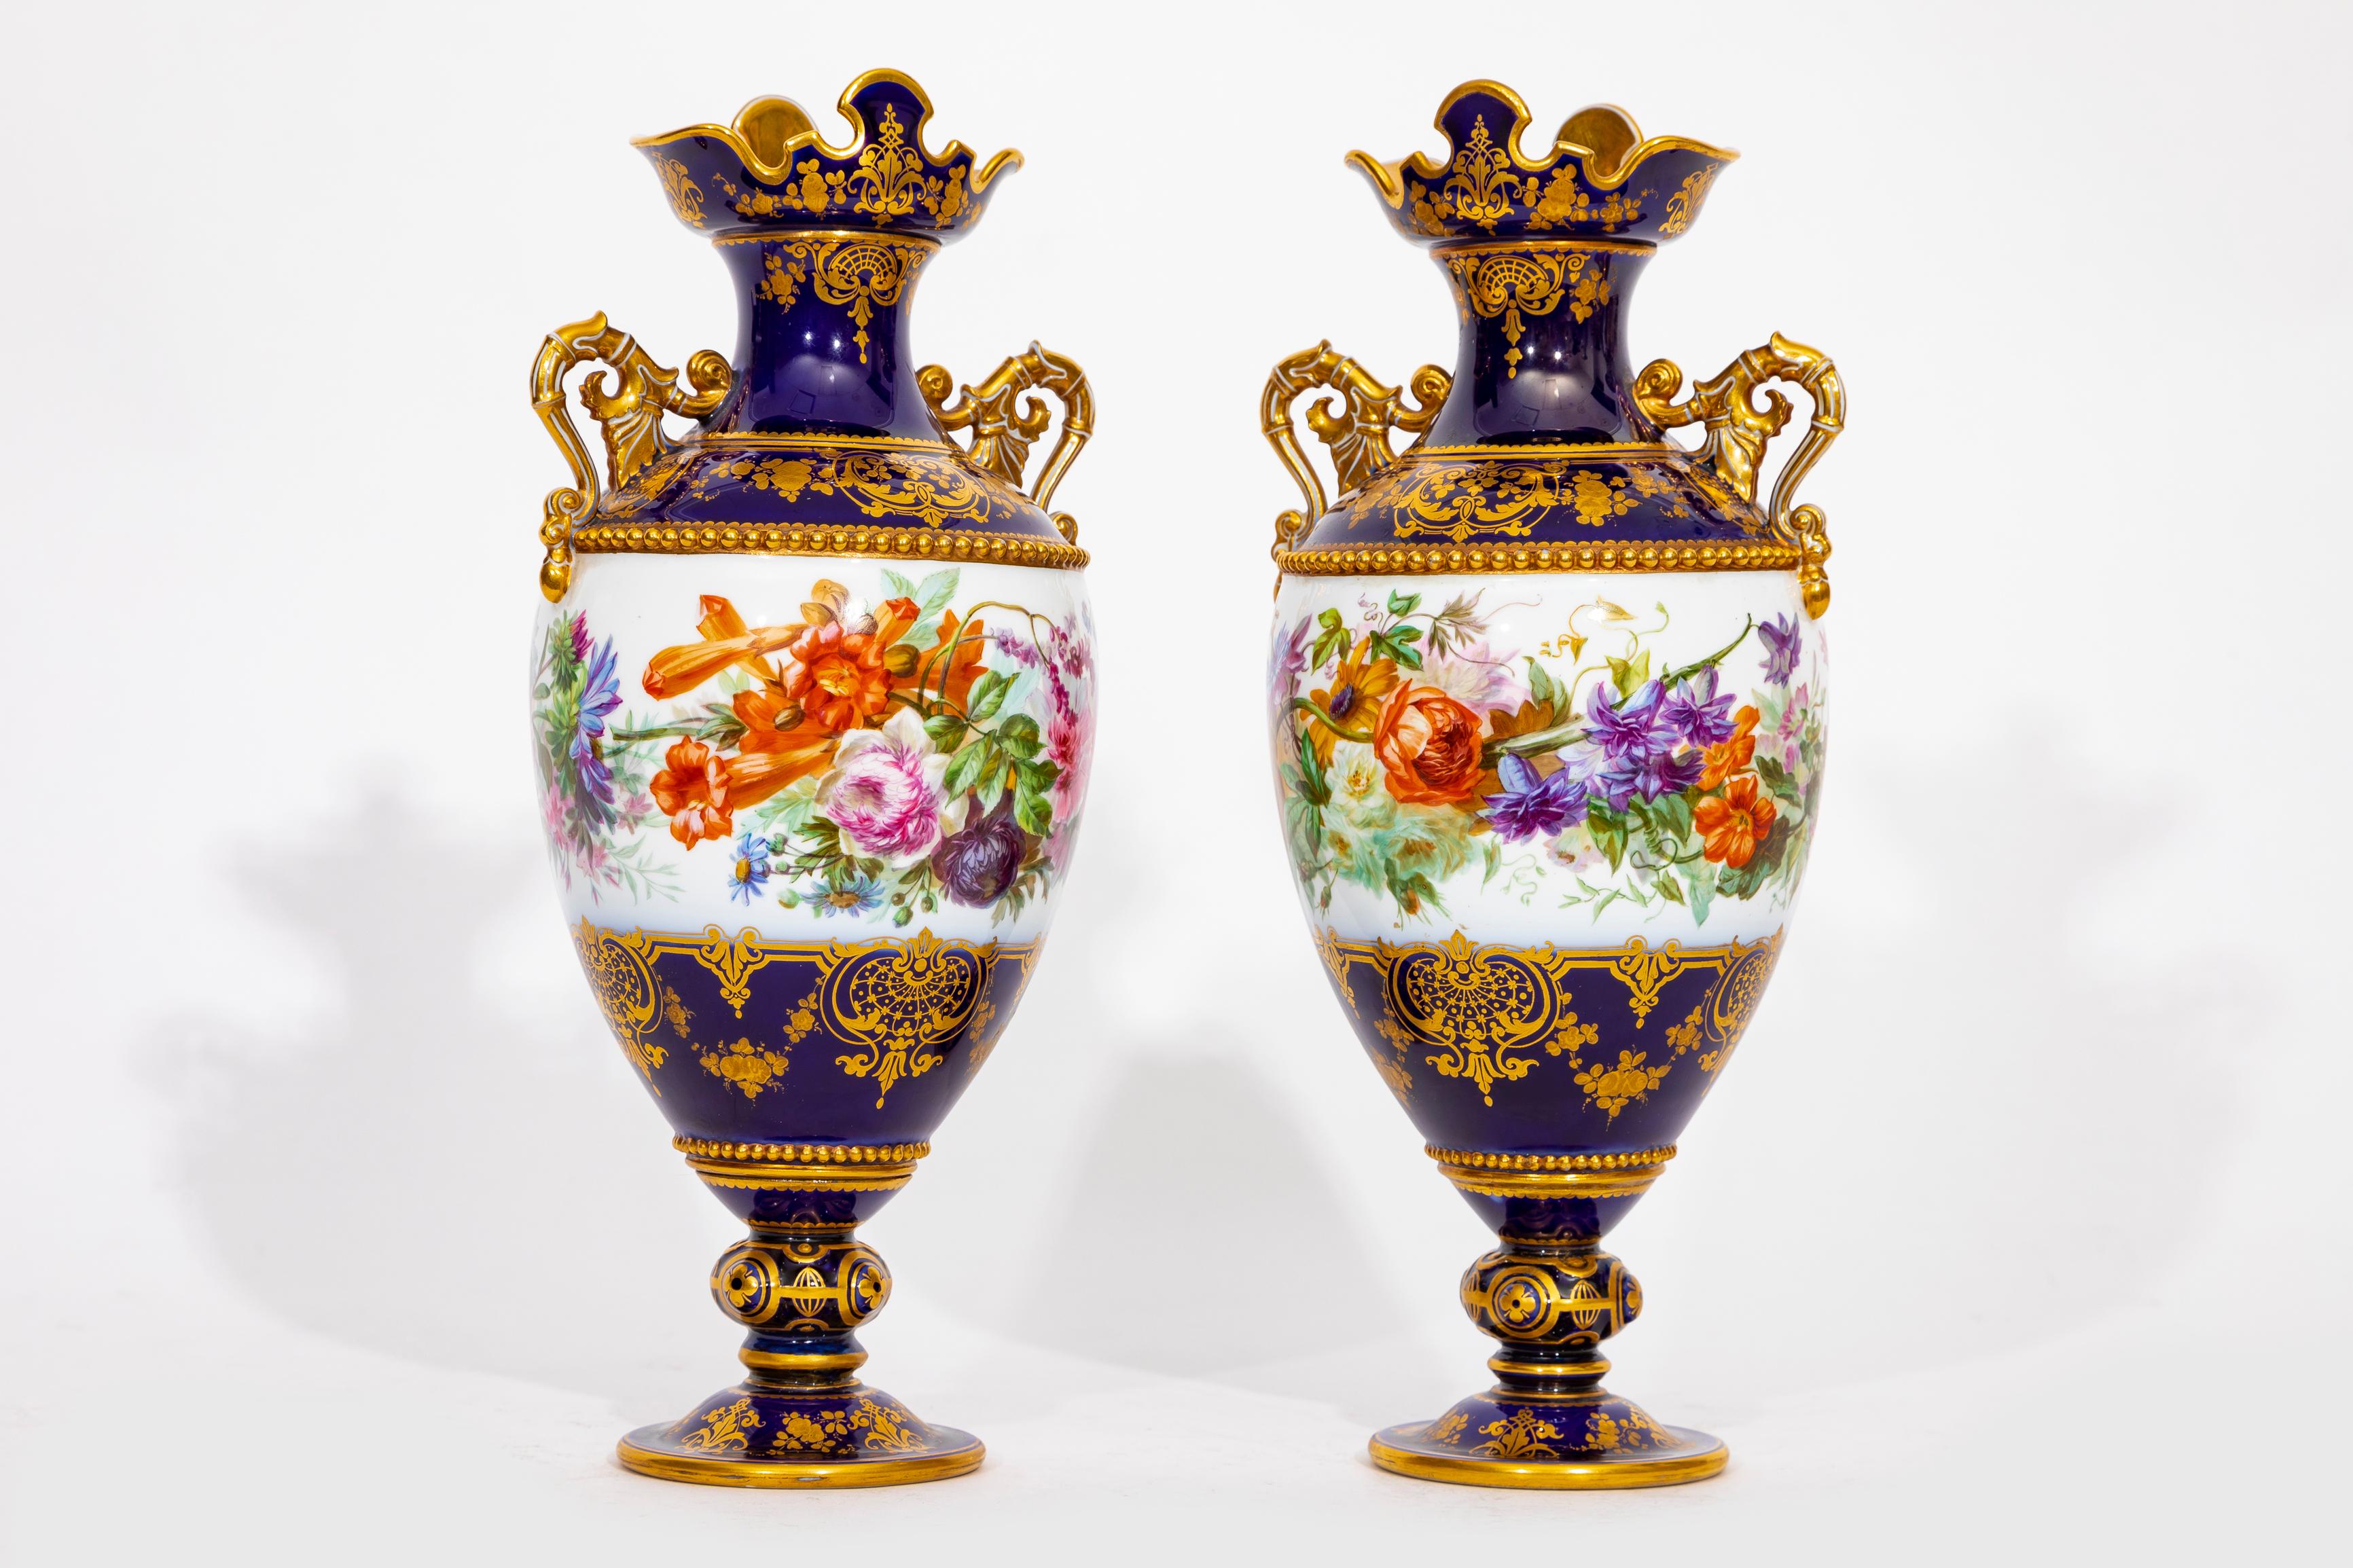 An Incredible and Quite Rare Pair Of Sevres Porcelain Cobalt-Blue Ground Vases Adélaïde, 2eme Grandeur; 1843-1849, green printed S.49 lozenge for 1849 to the underside of each socle, iron-red printed R.F. 49 république française decoration and